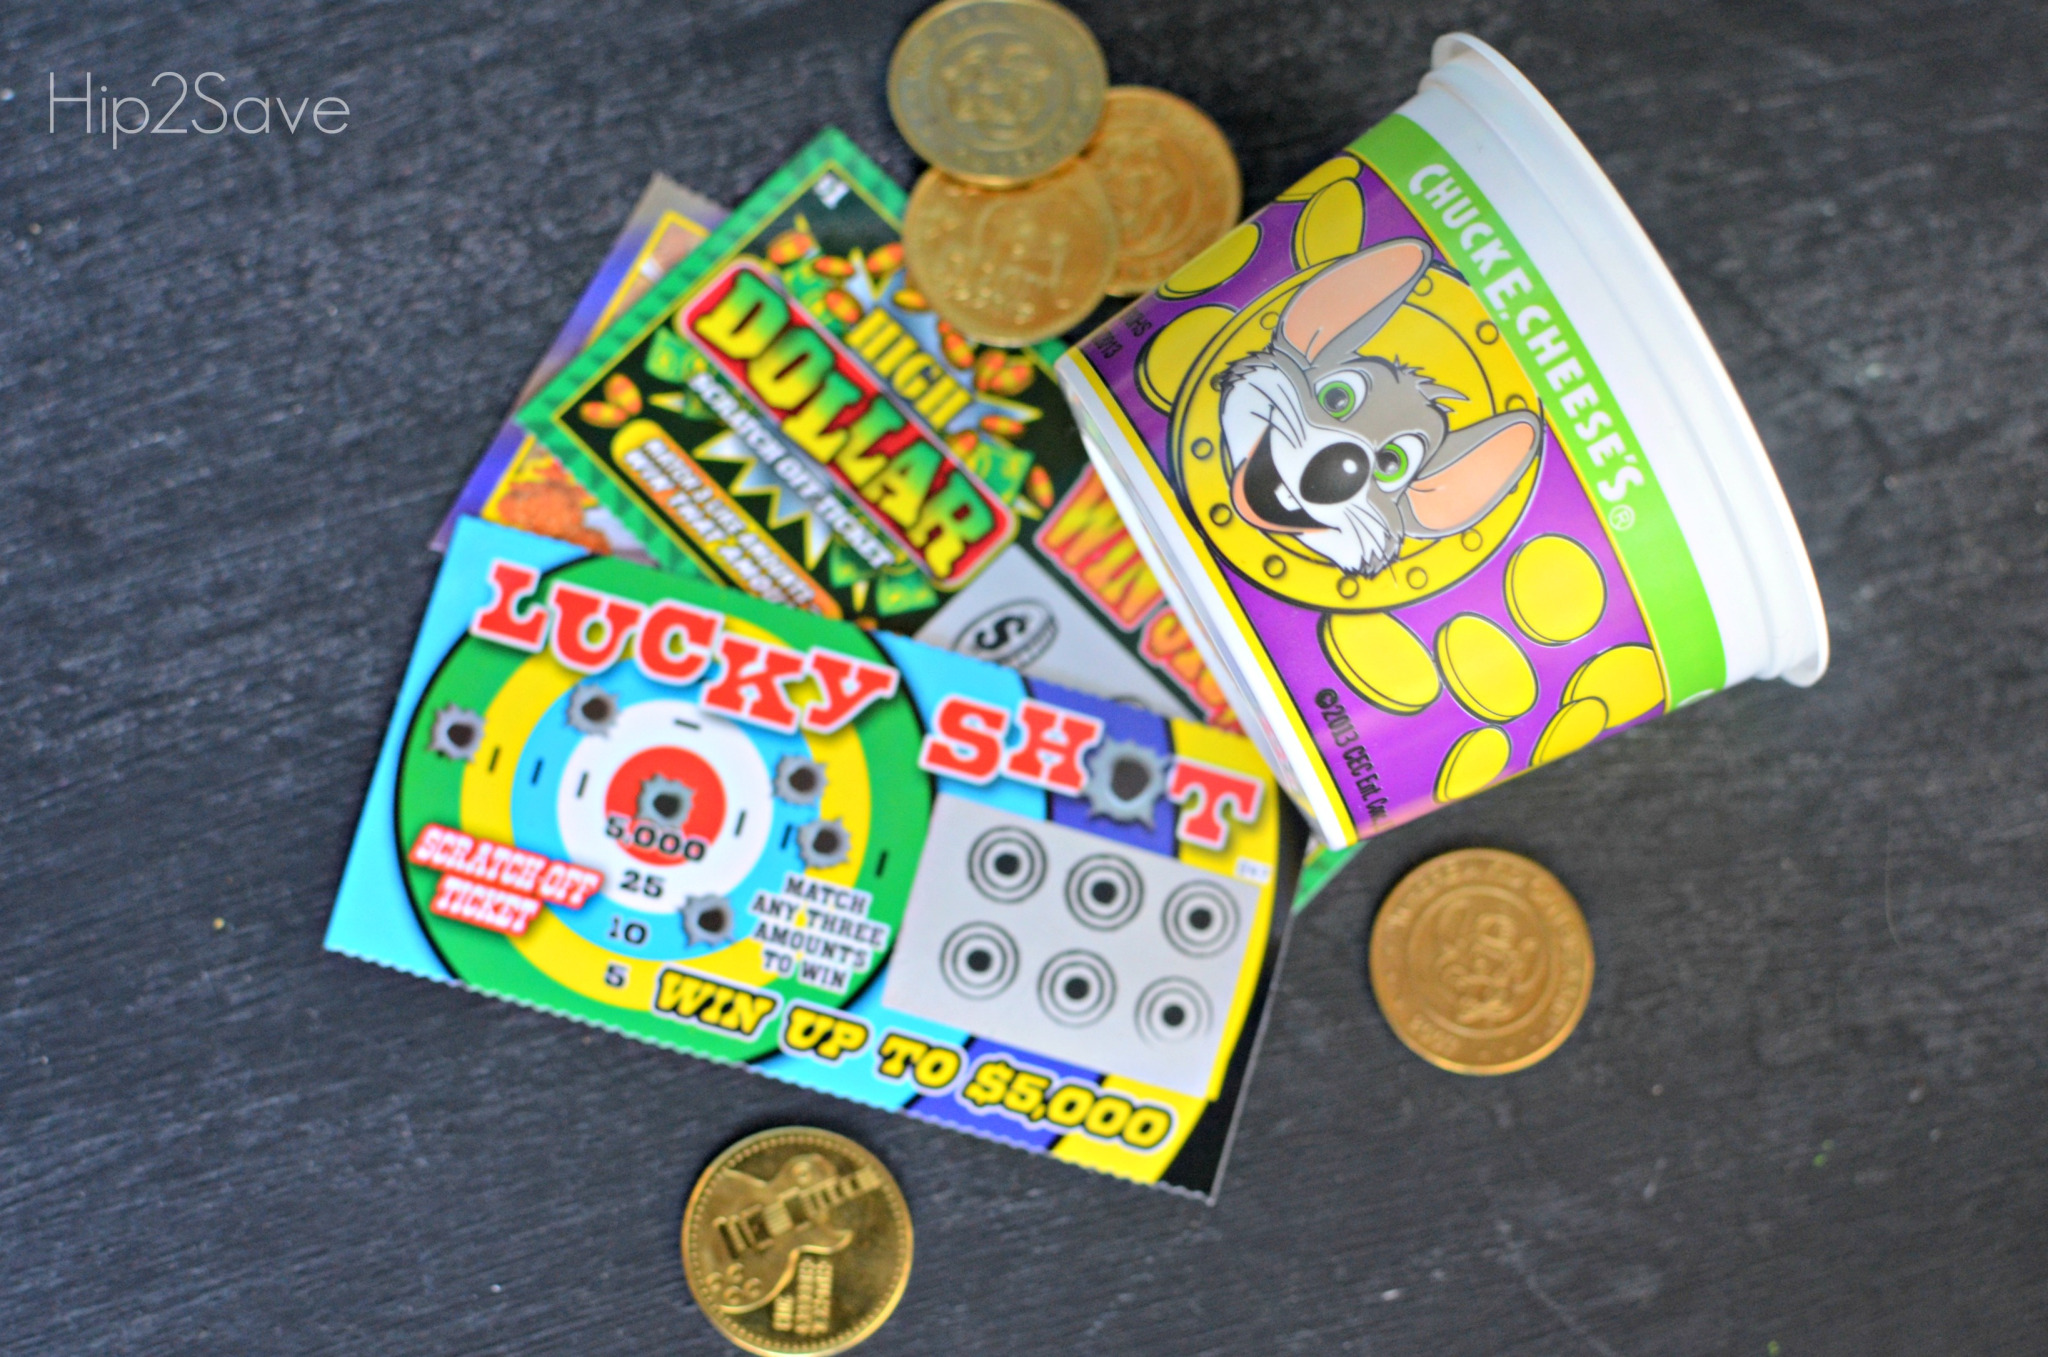 Chuck E. Cheese offers freebies and discounts for good grades.